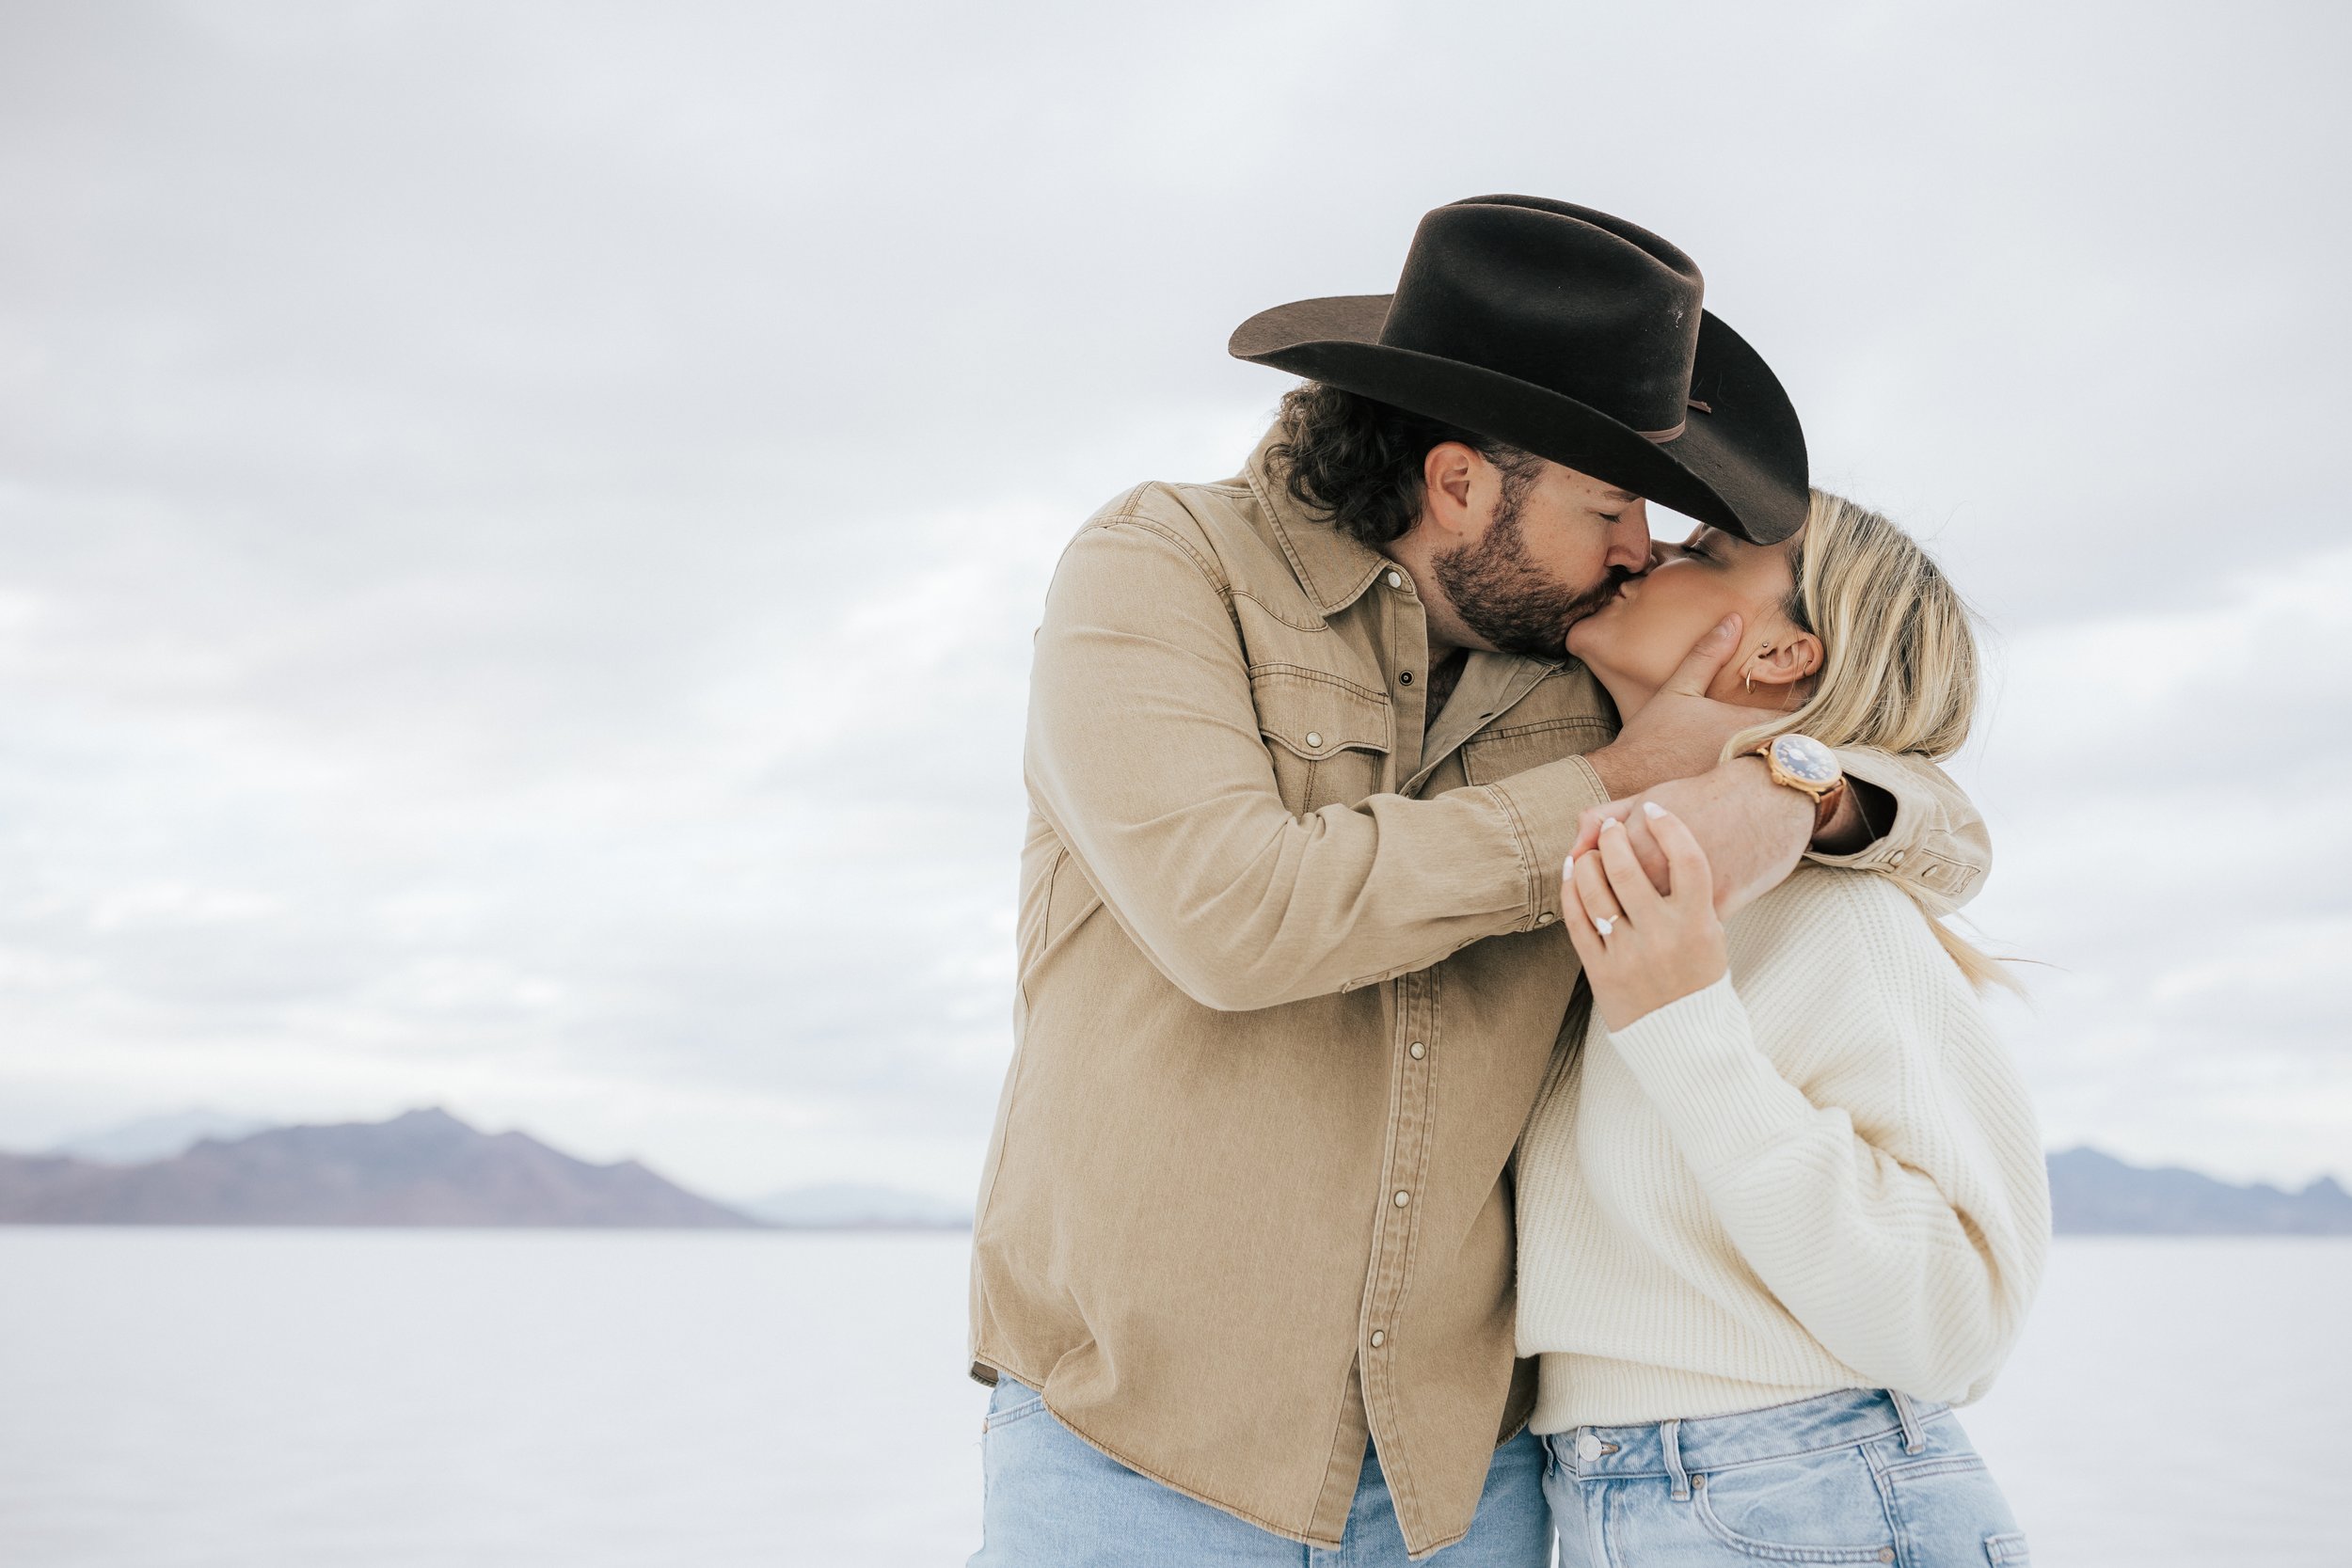  An engaged couple kisses at the Bonneville Salt Flats near Wendover, Nevada and Salt Lake City, Utah. The man is holding his girl’s neck as he kisses her. The Salt Flats are white and the sky is overcast. The mountains show behind. Engagement sessio